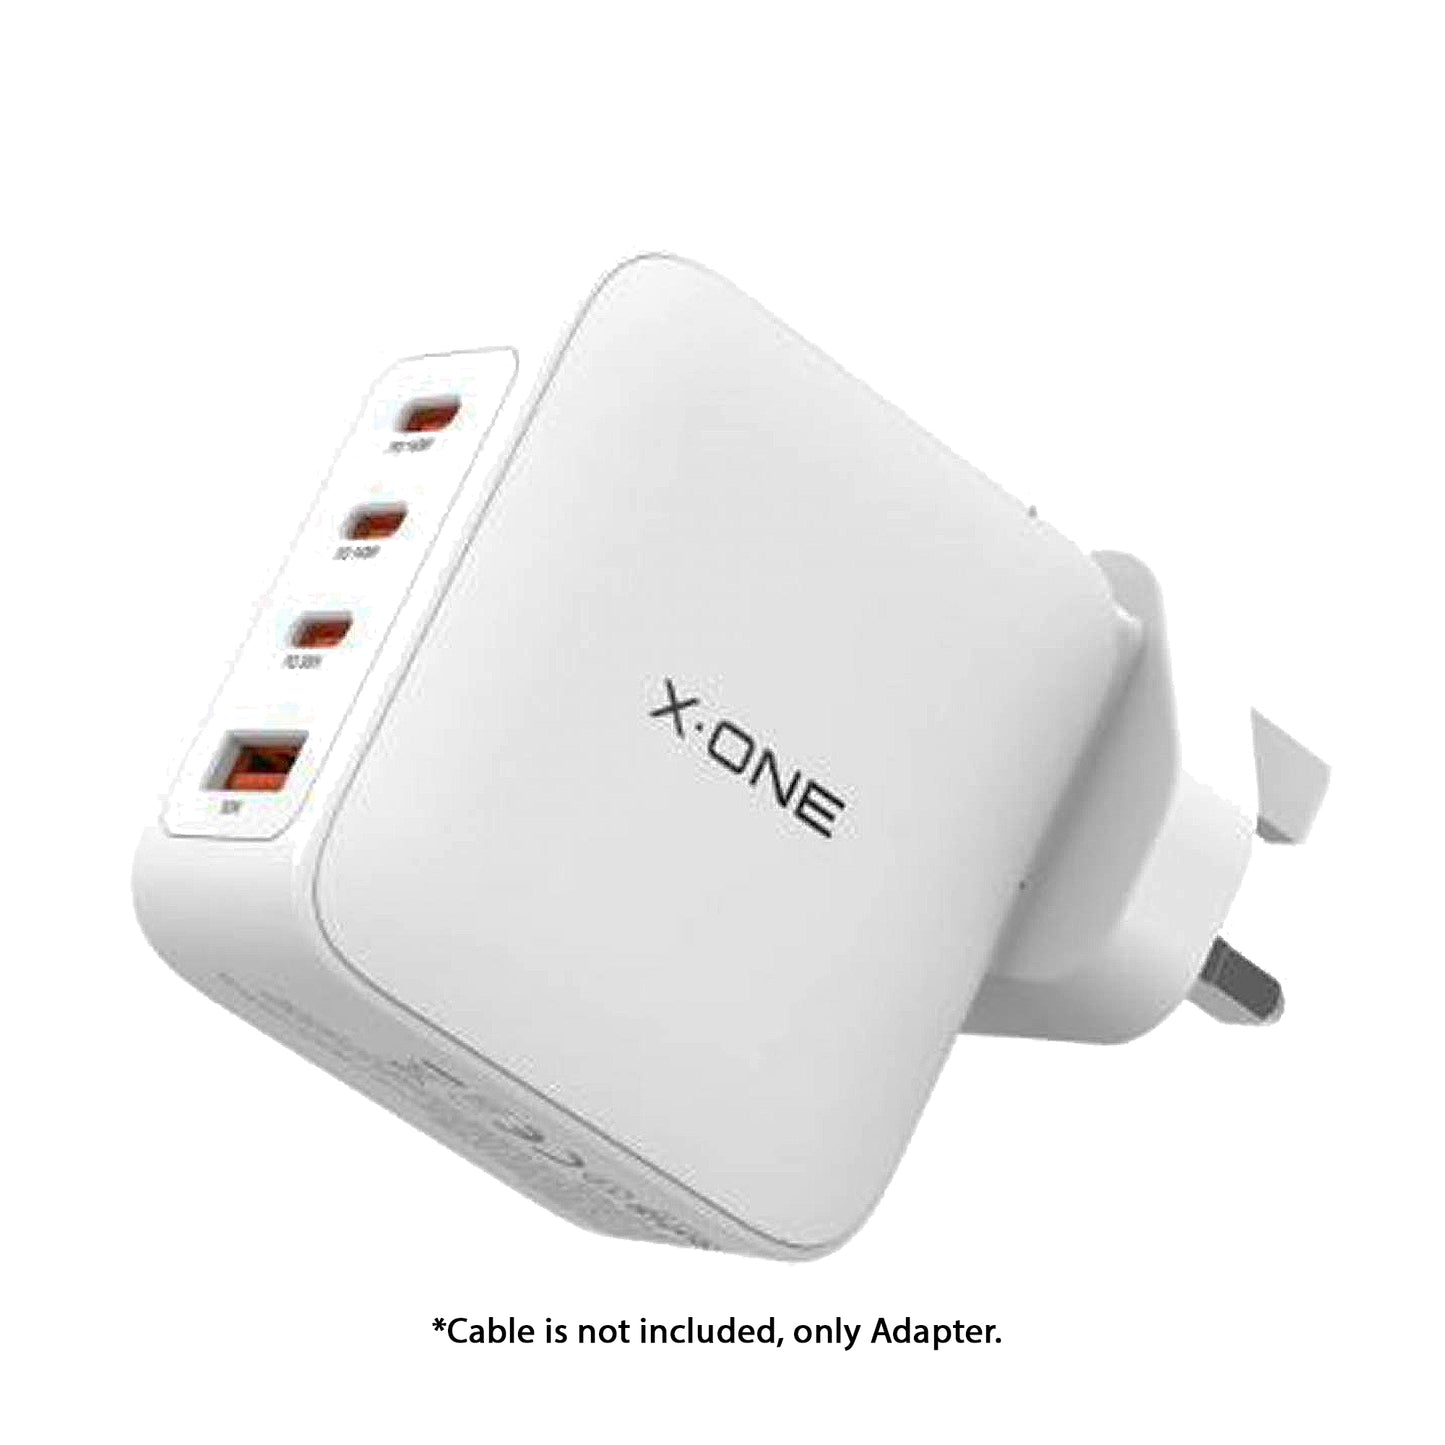 X.One 140W GaN 6 Turbo Ultra Fast Charger 4 Port ( 3 USB C , 1 USB A) PD 3.1 , QC 4.0+ Adapter Wall Charger